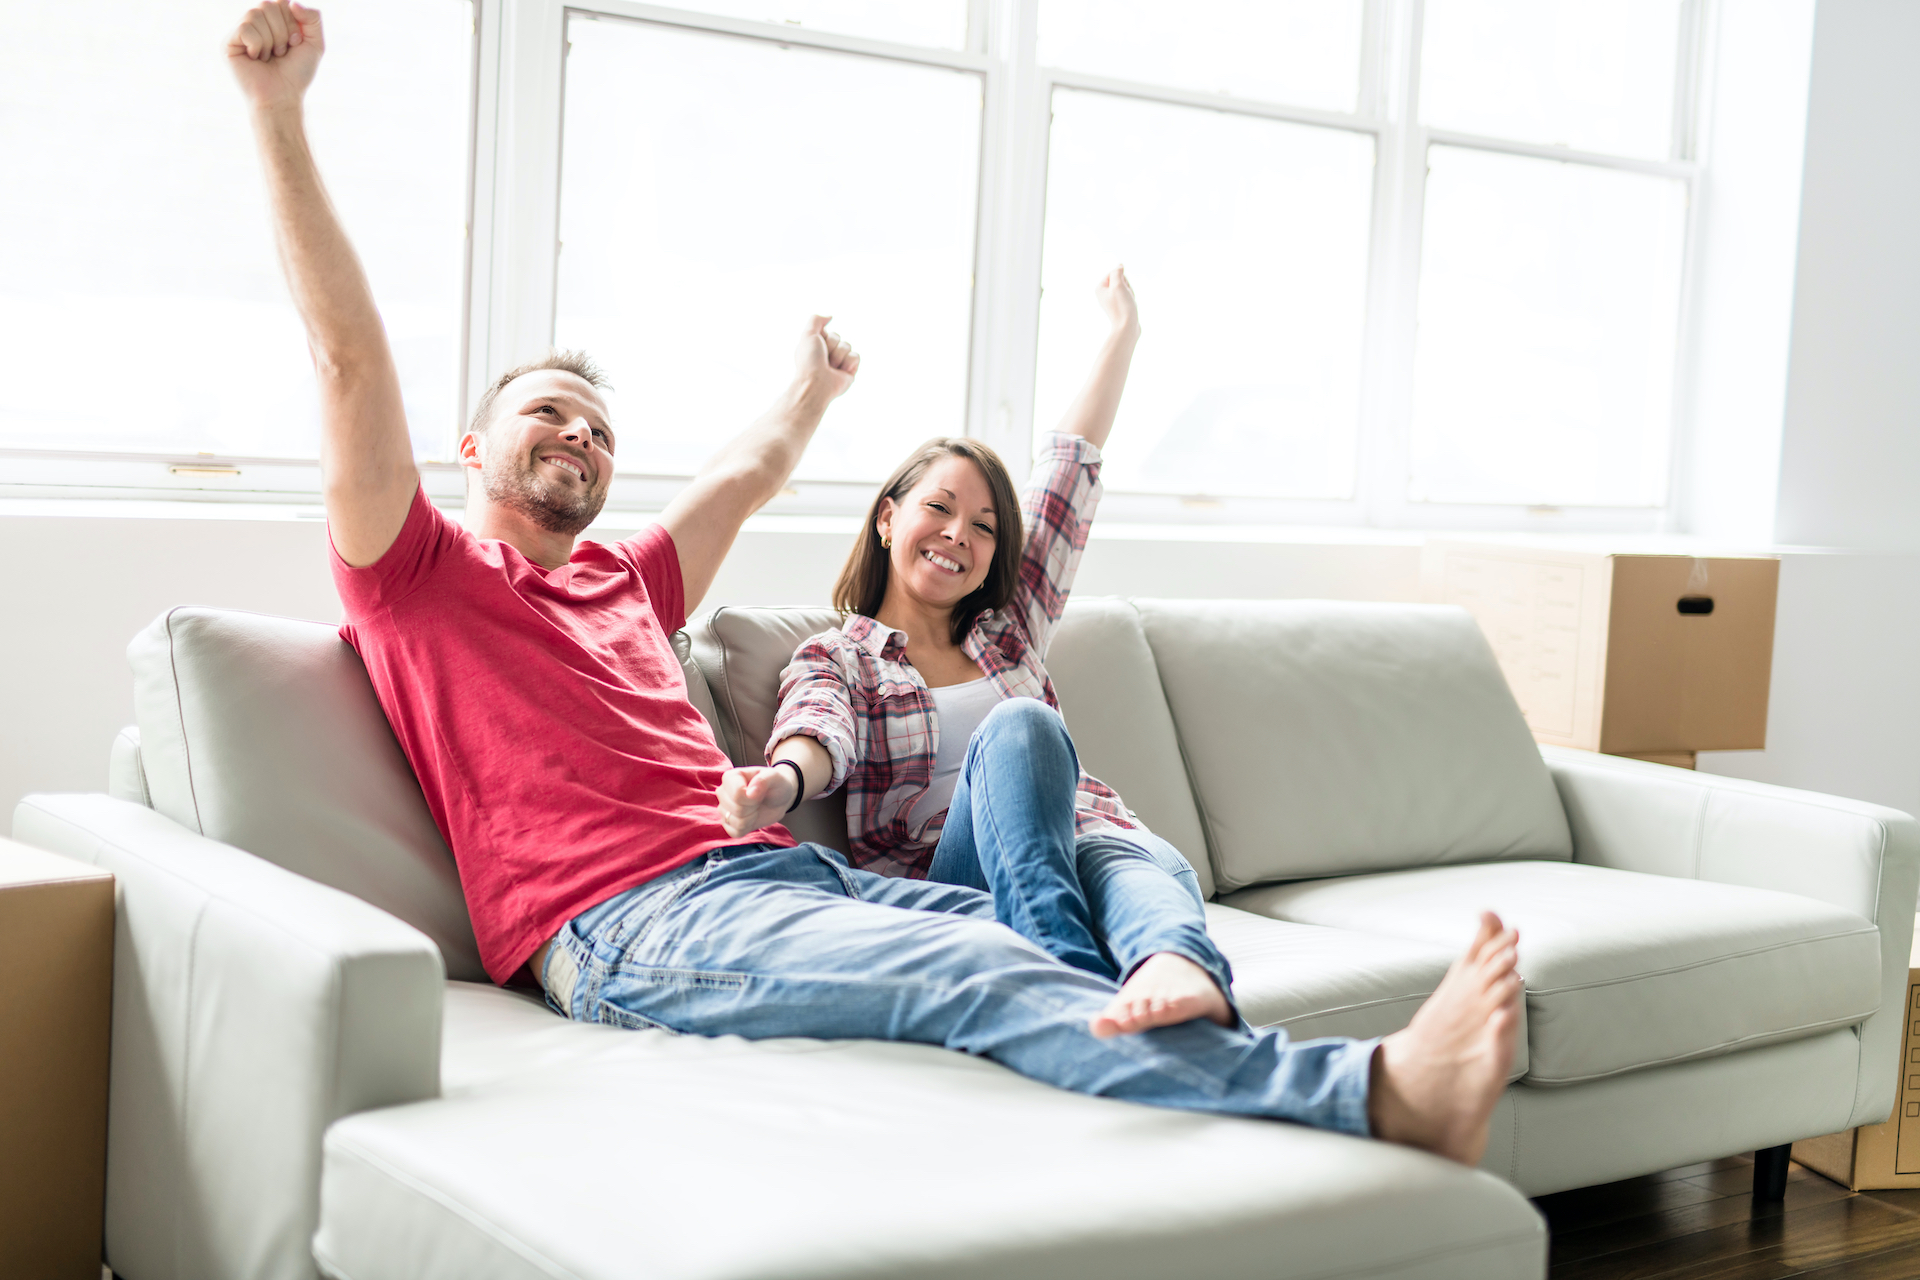 Couple,Sitting,Together,On,Sofa,At,Home,Happy,To,Move